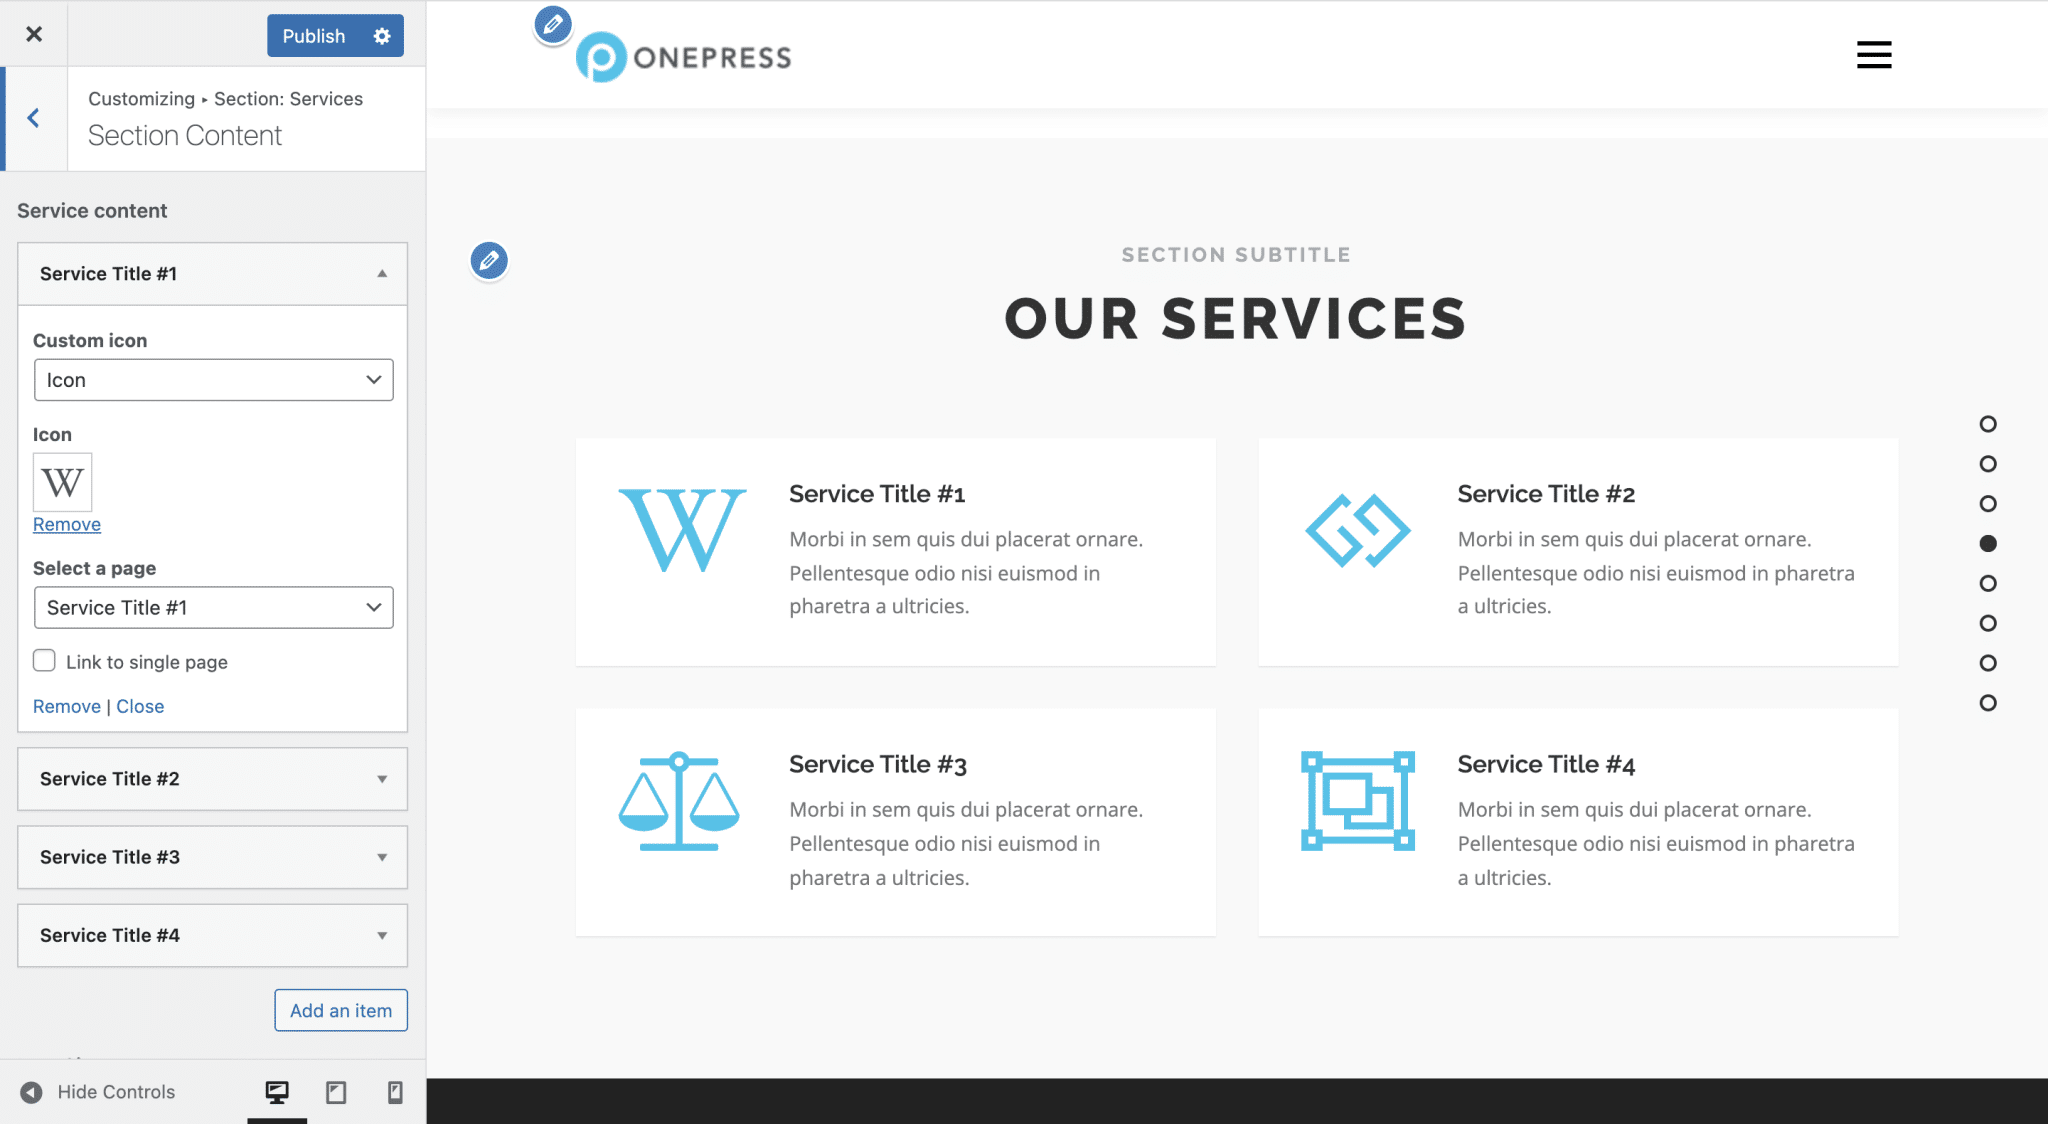 "Services" section settings of a WordPress OnePress site.